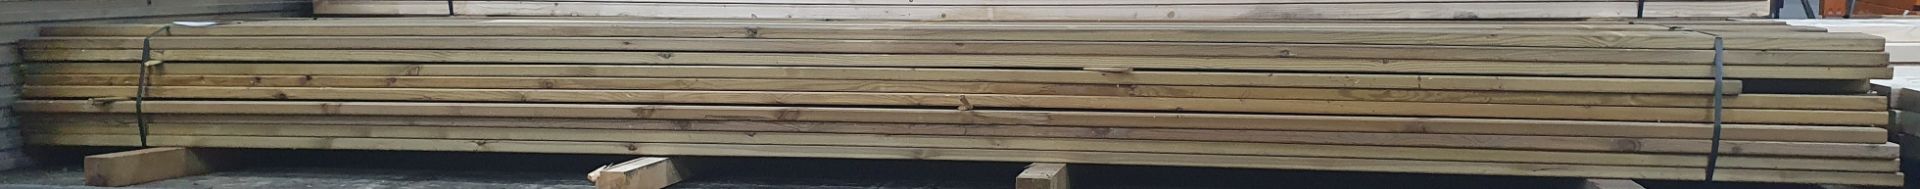 55 x Lengths of Decking | Size: (L) 420cm x (W) 14cm x (H) 3cm - Image 3 of 6